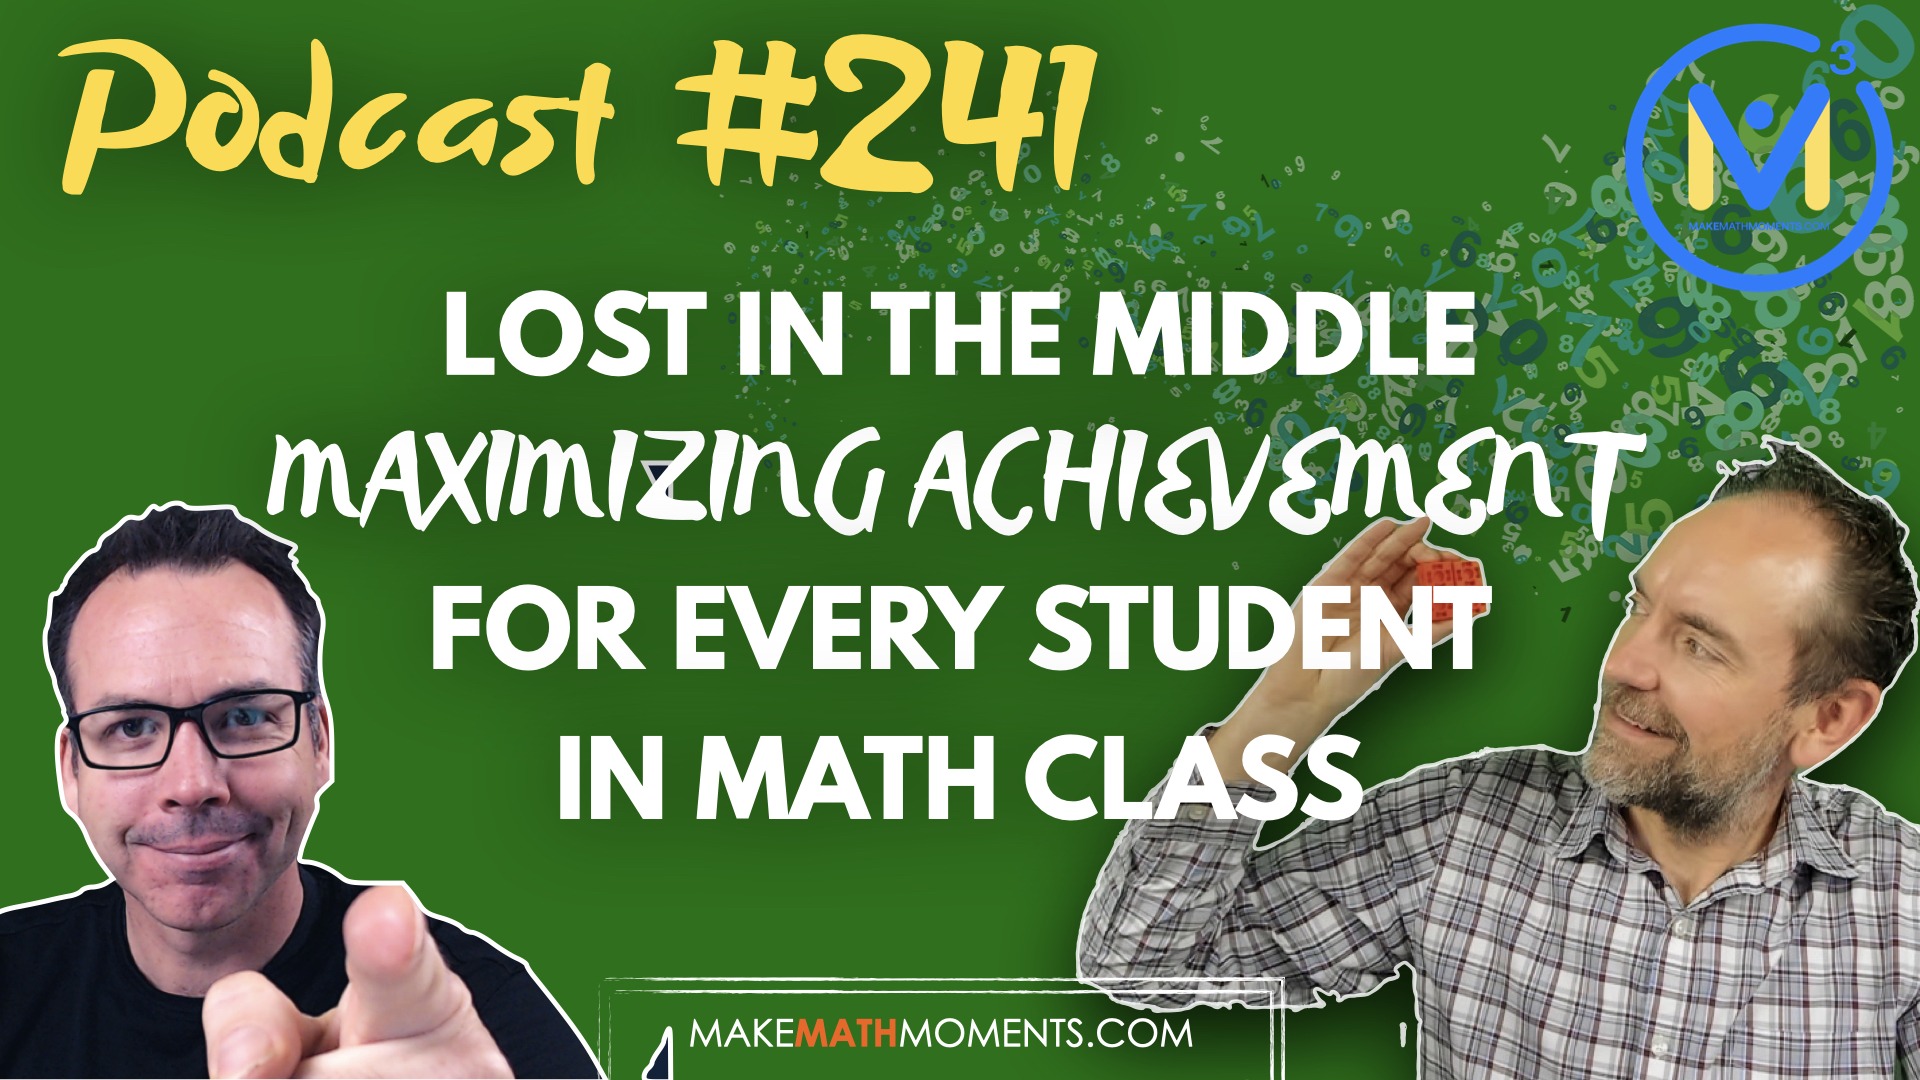 Episode 241: Lost in the Middle: Maximizing Achievement for Every Student in Math Class